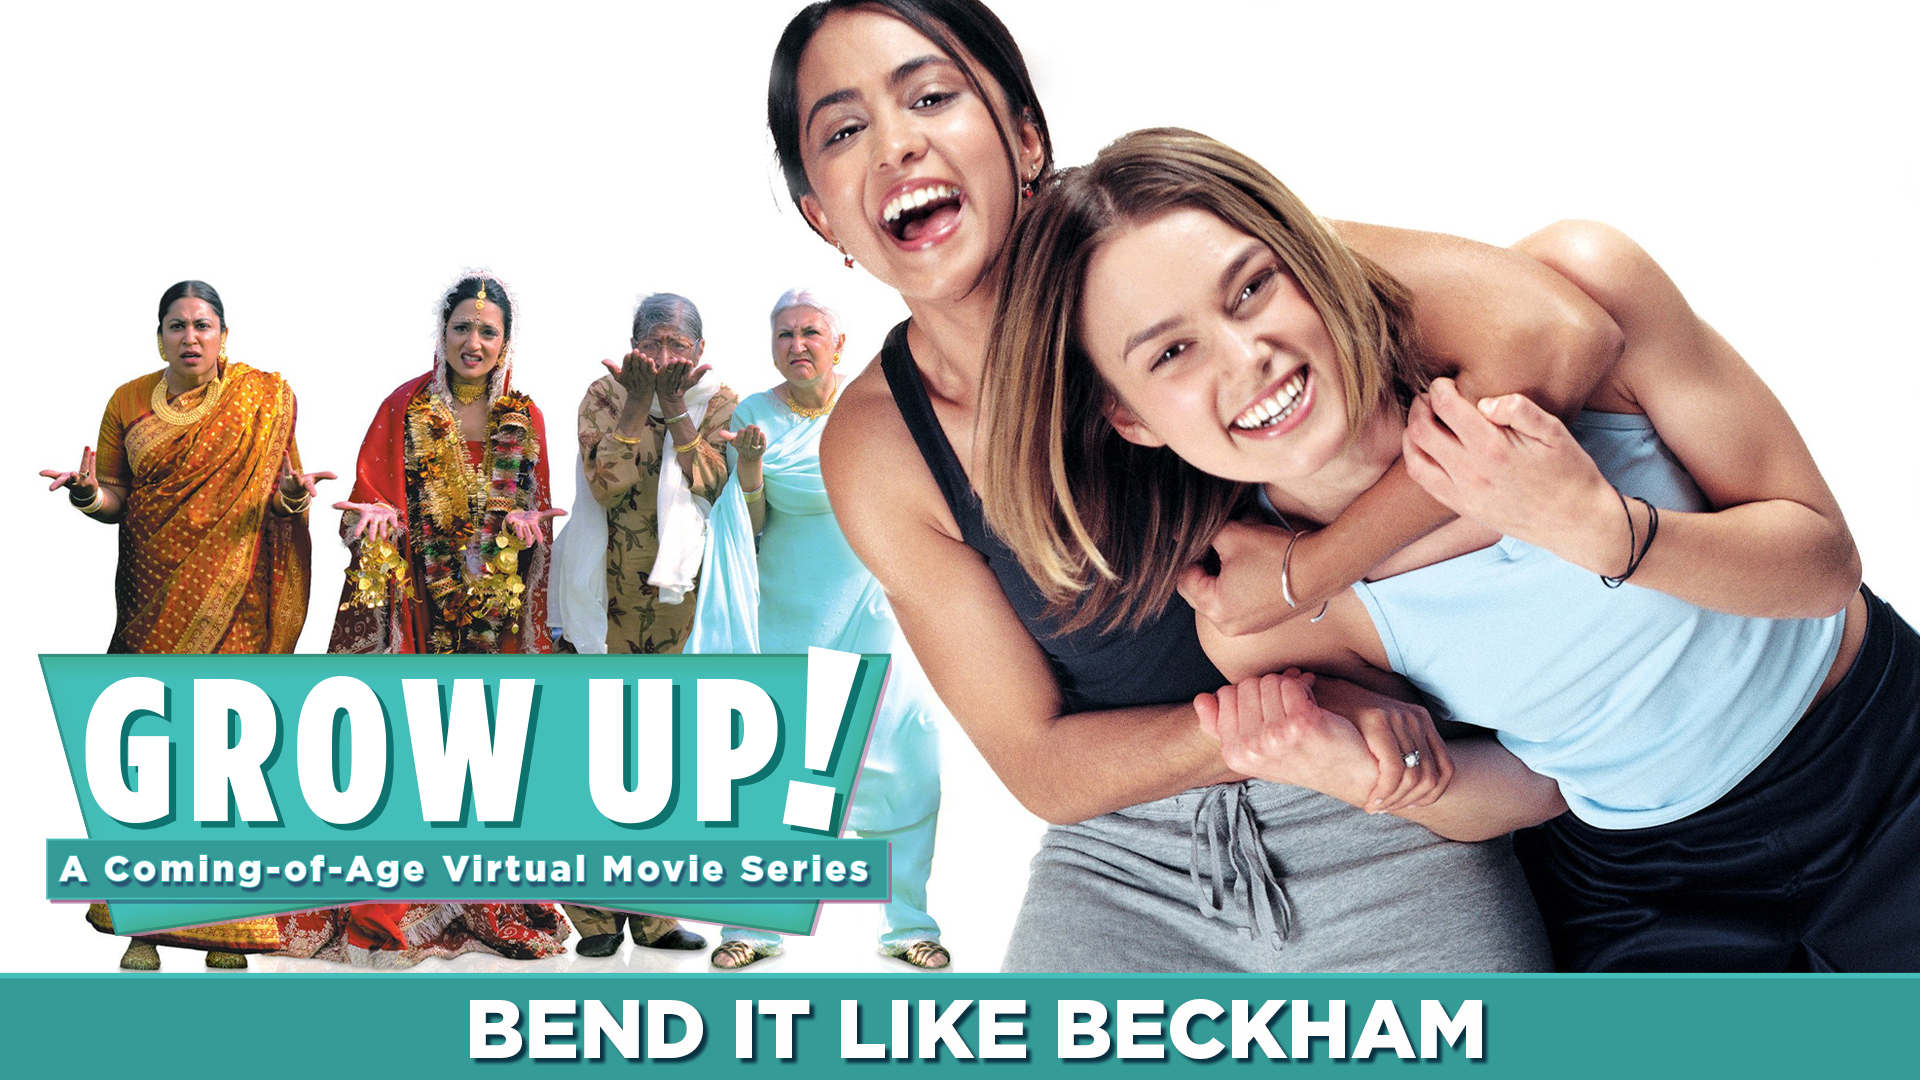 Grow Up! A Coming-of-Age Virtual Movie Series - Bend it Like Beckham